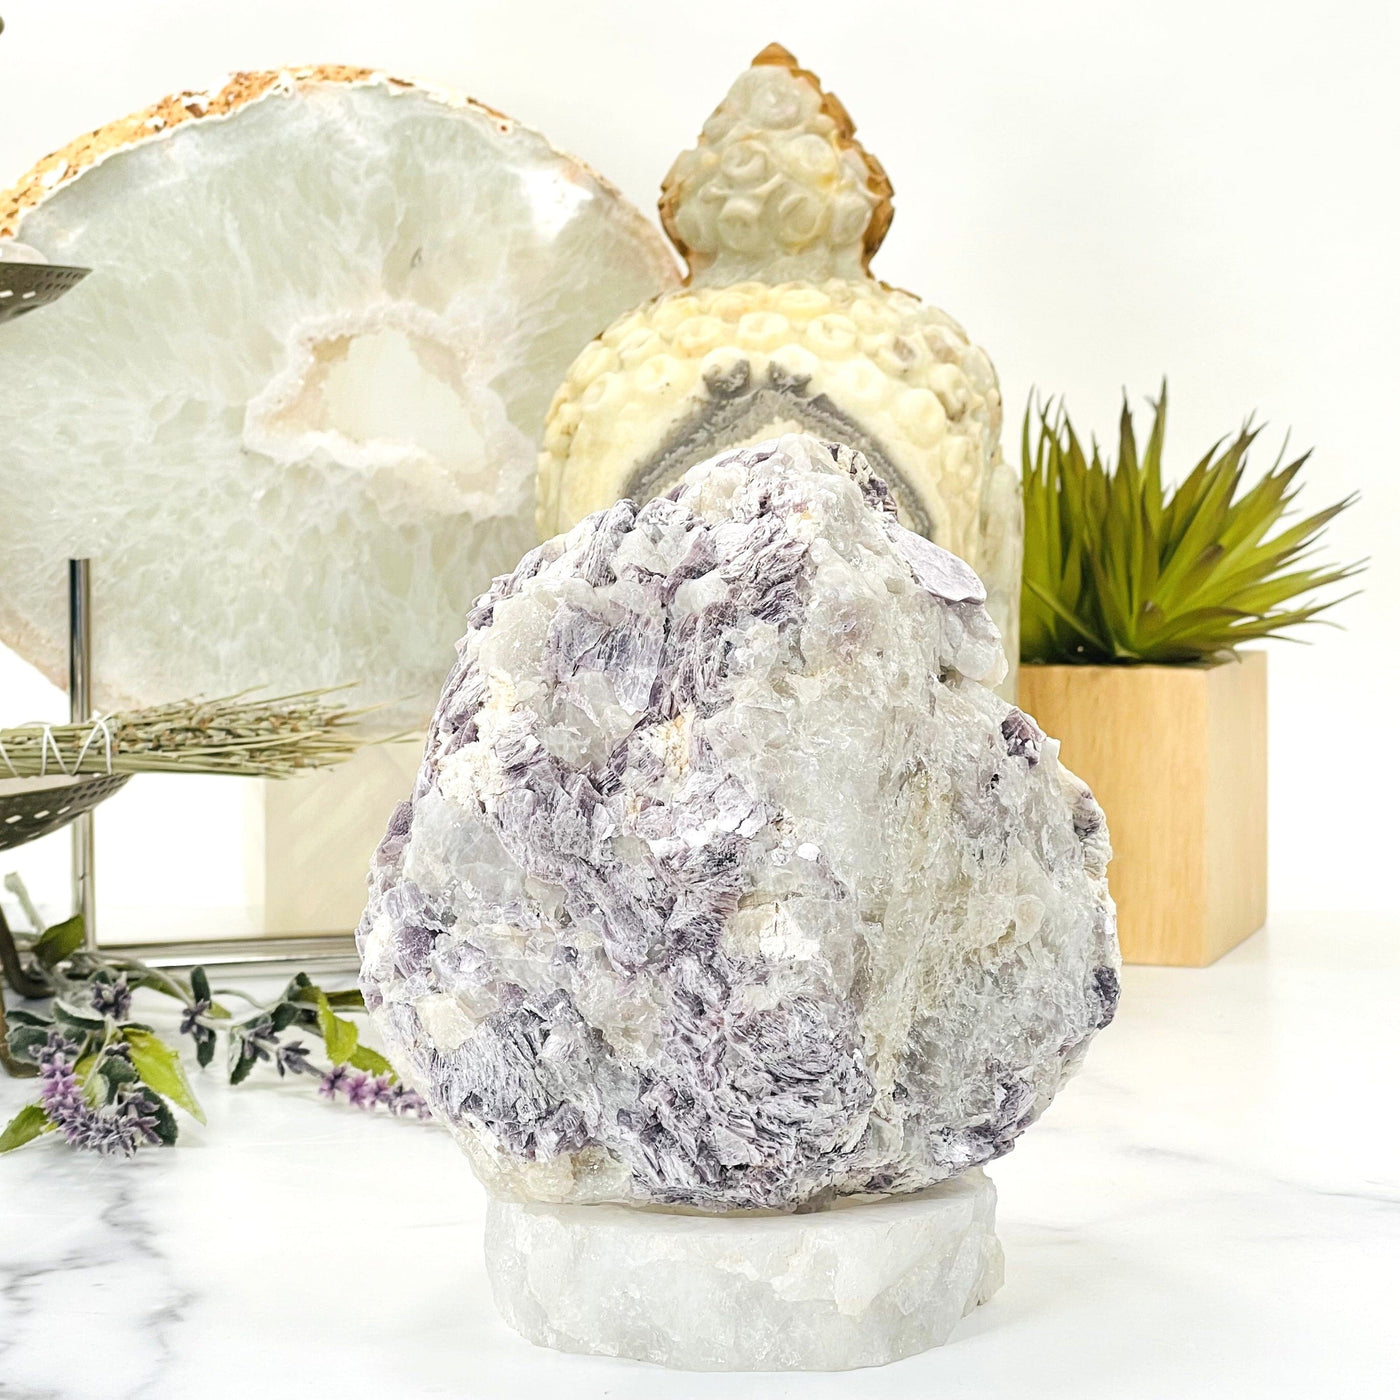 A front angle of the vibrant Lepidolite Mica Quartz on white background